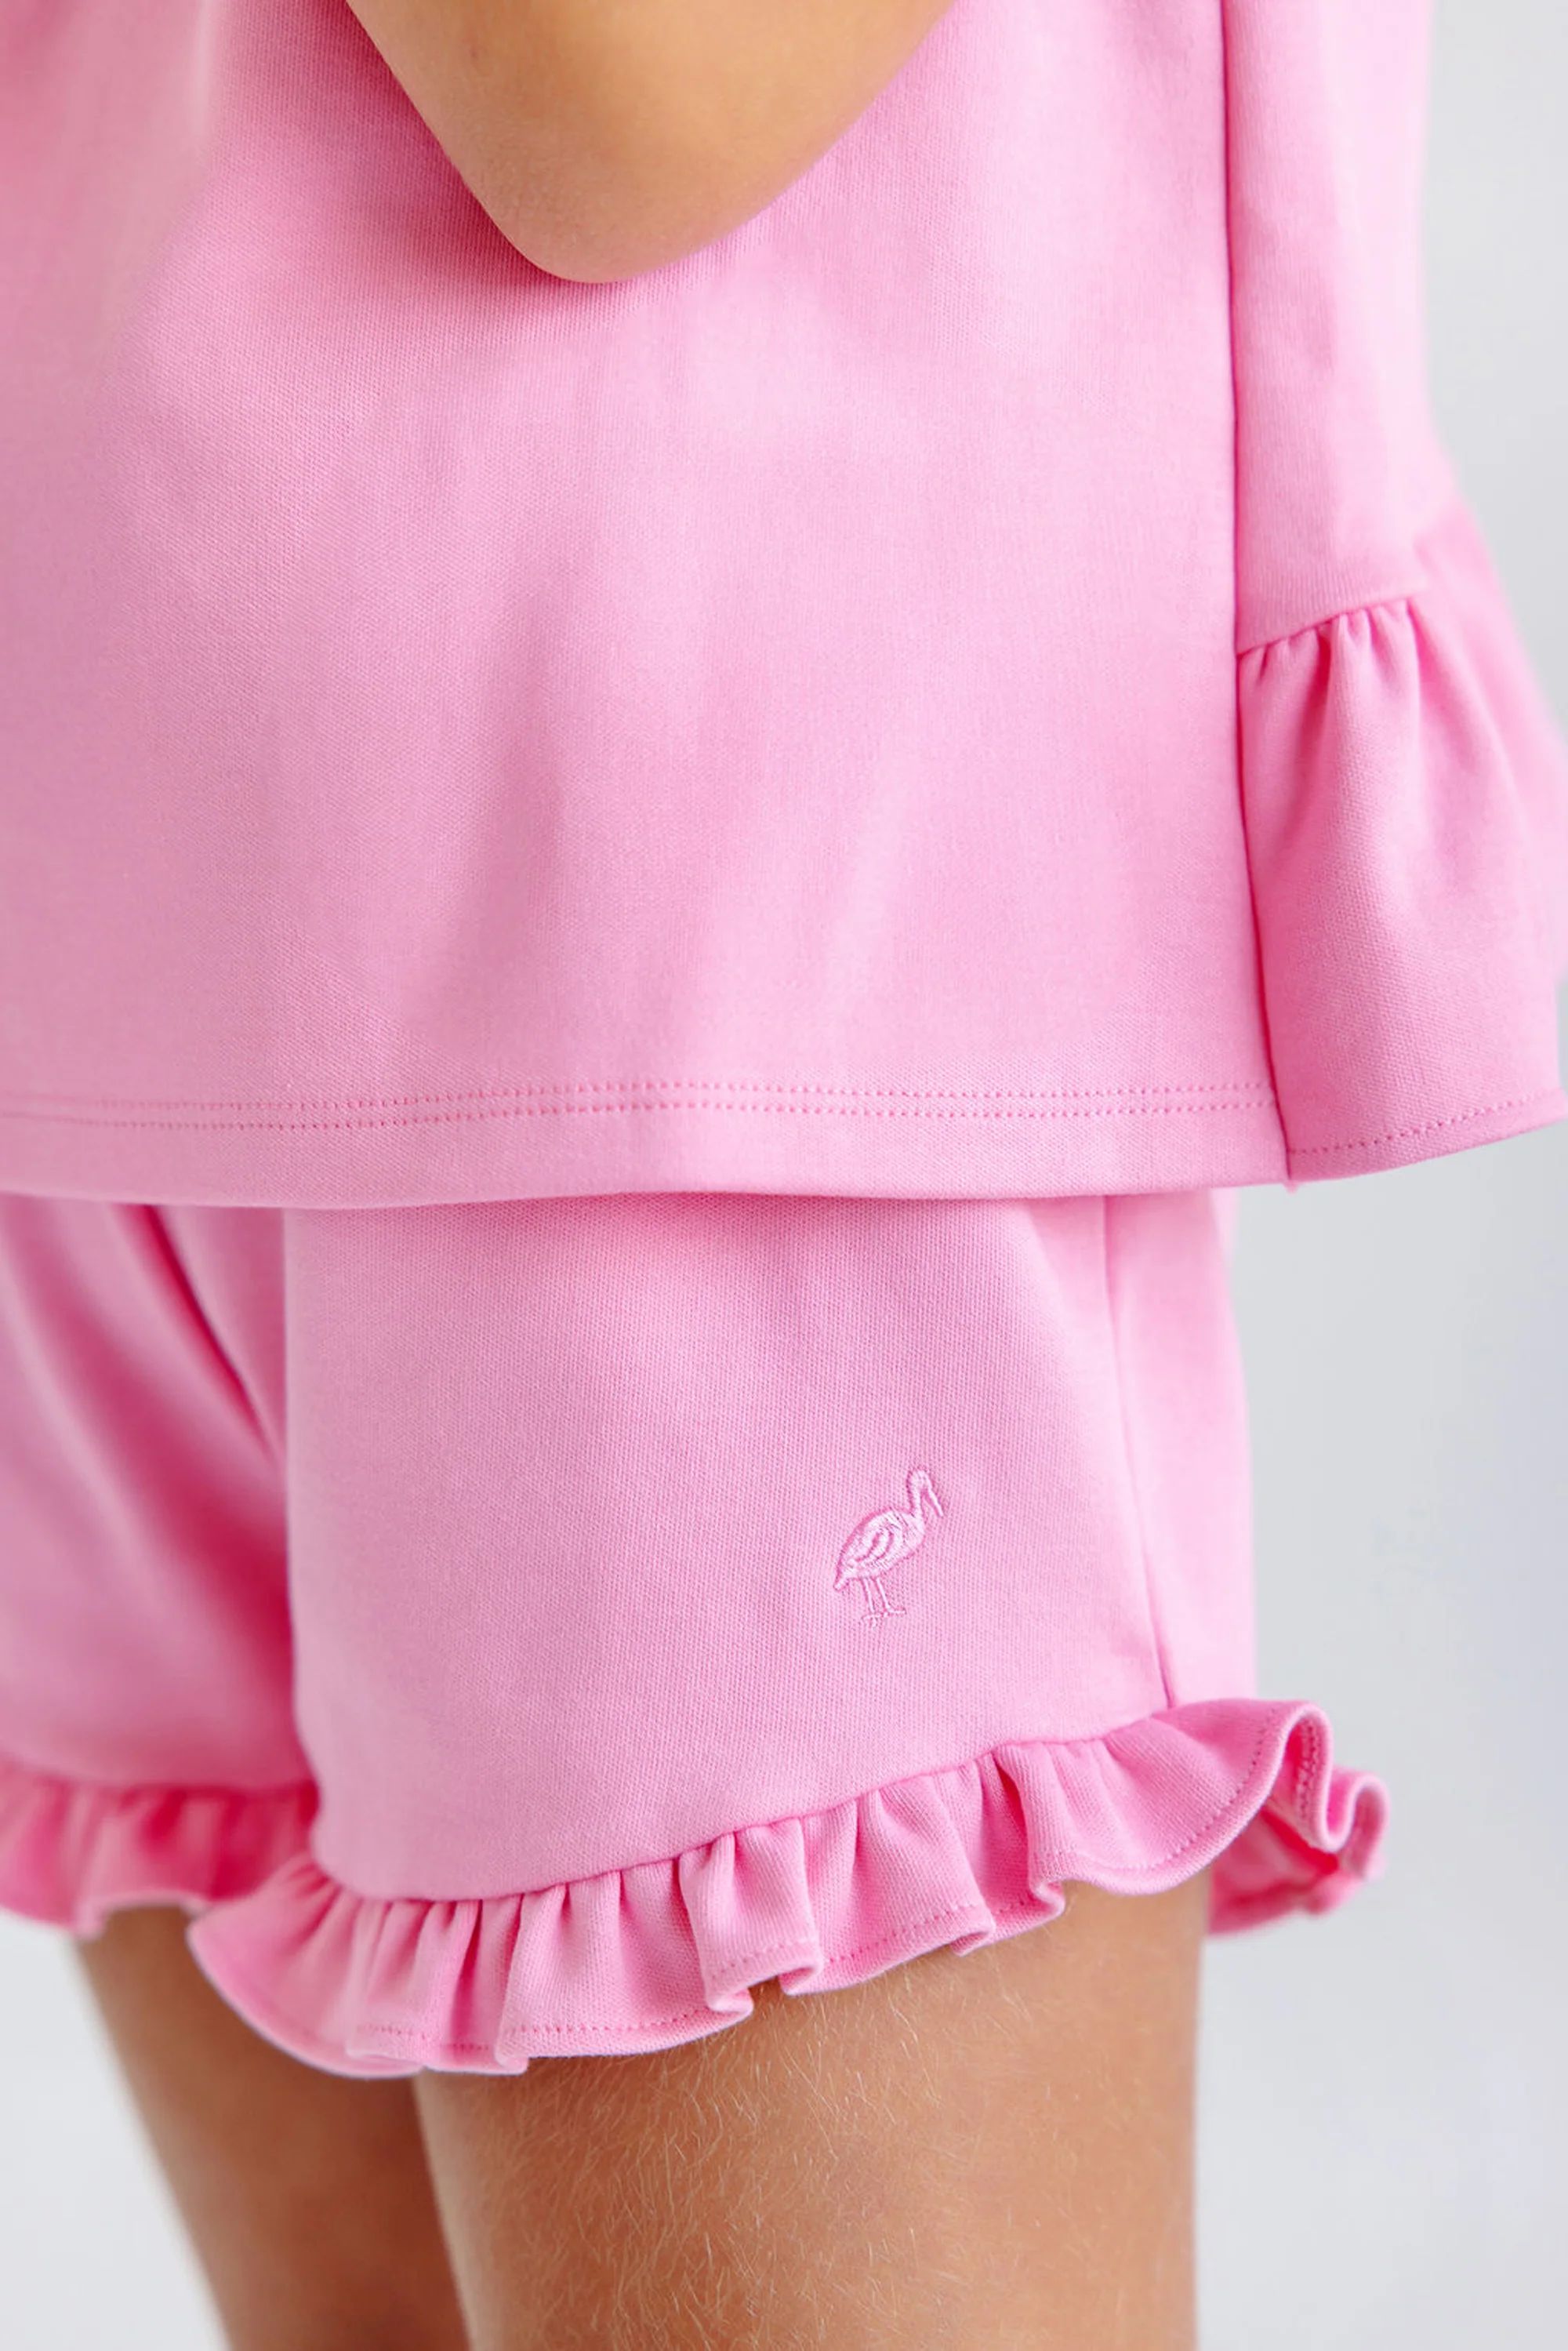 Shelby Anne Shorts - Hamptons Hot Pink | The Beaufort Bonnet Company